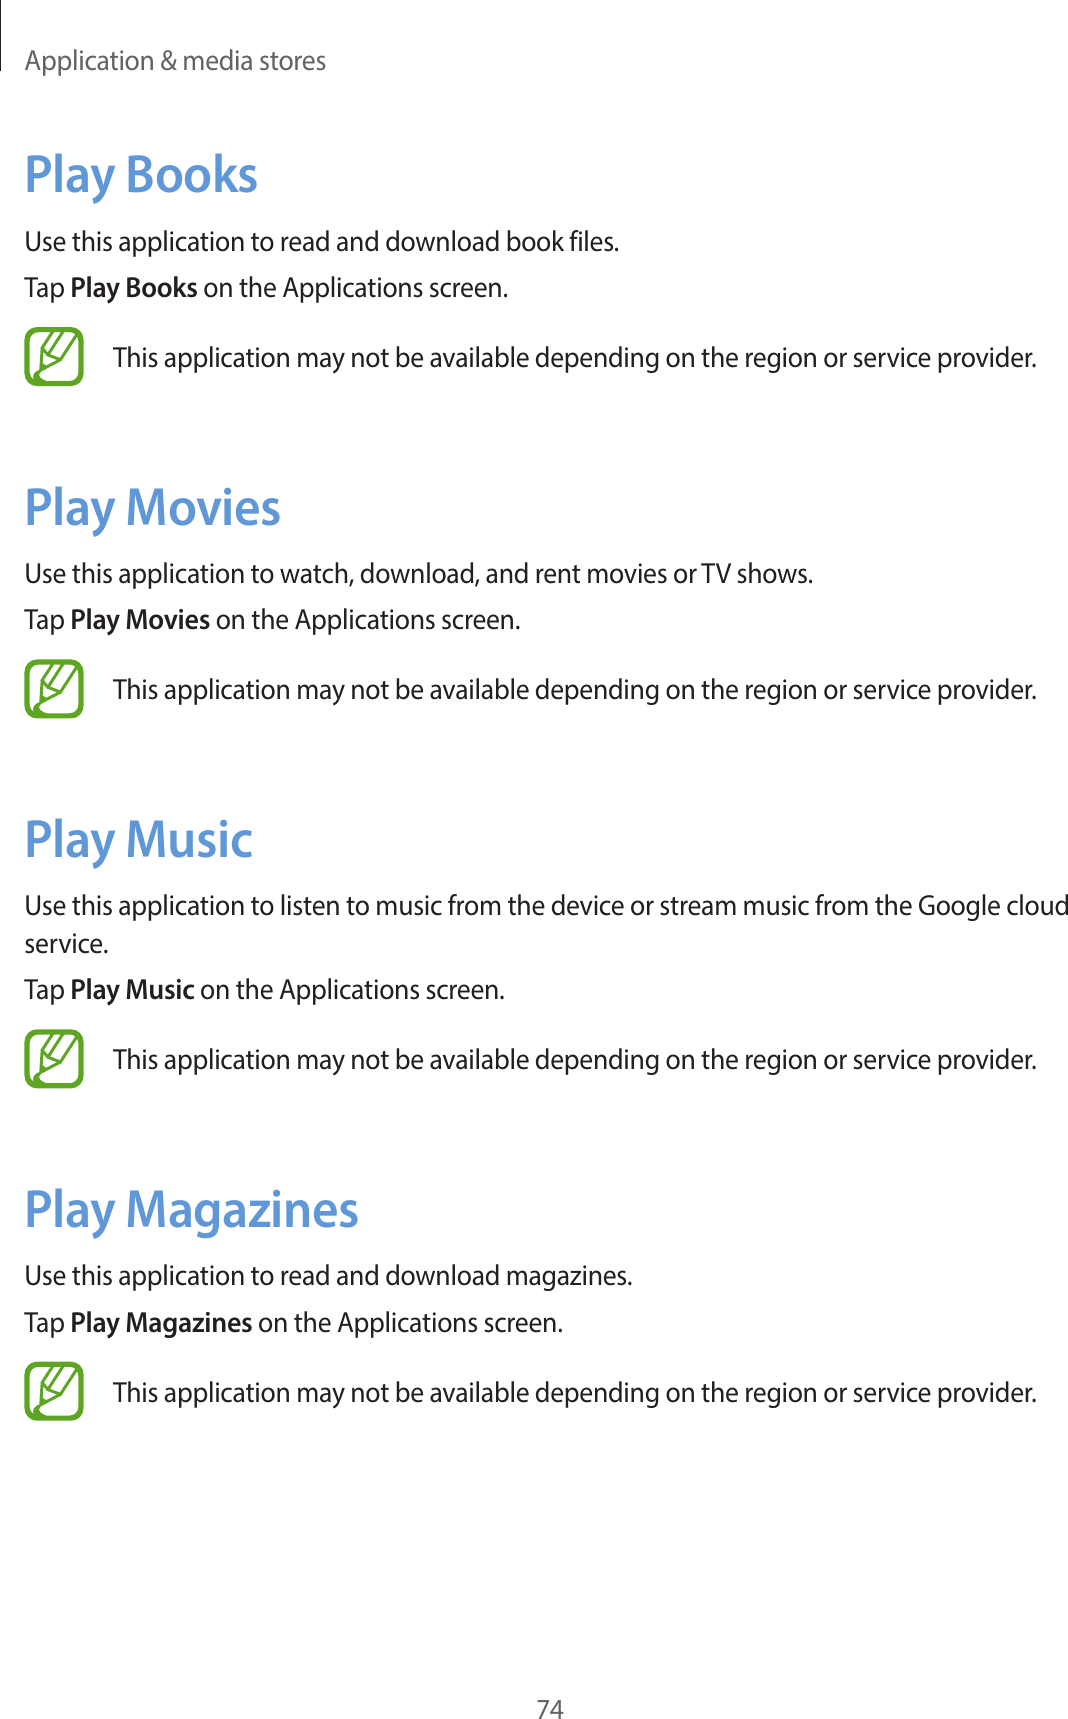 Application &amp; media stores74Play BooksUse this application to read and download book files.Tap Play Books on the Applications screen.This application may not be available depending on the region or service provider.Play MoviesUse this application to watch, download, and rent movies or TV shows.Tap Play Movies on the Applications screen.This application may not be available depending on the region or service provider.Play MusicUse this application to listen to music from the device or stream music from the Google cloud service.Tap Play Music on the Applications screen.This application may not be available depending on the region or service provider.Play MagazinesUse this application to read and download magazines.Tap Play Magazines on the Applications screen.This application may not be available depending on the region or service provider.